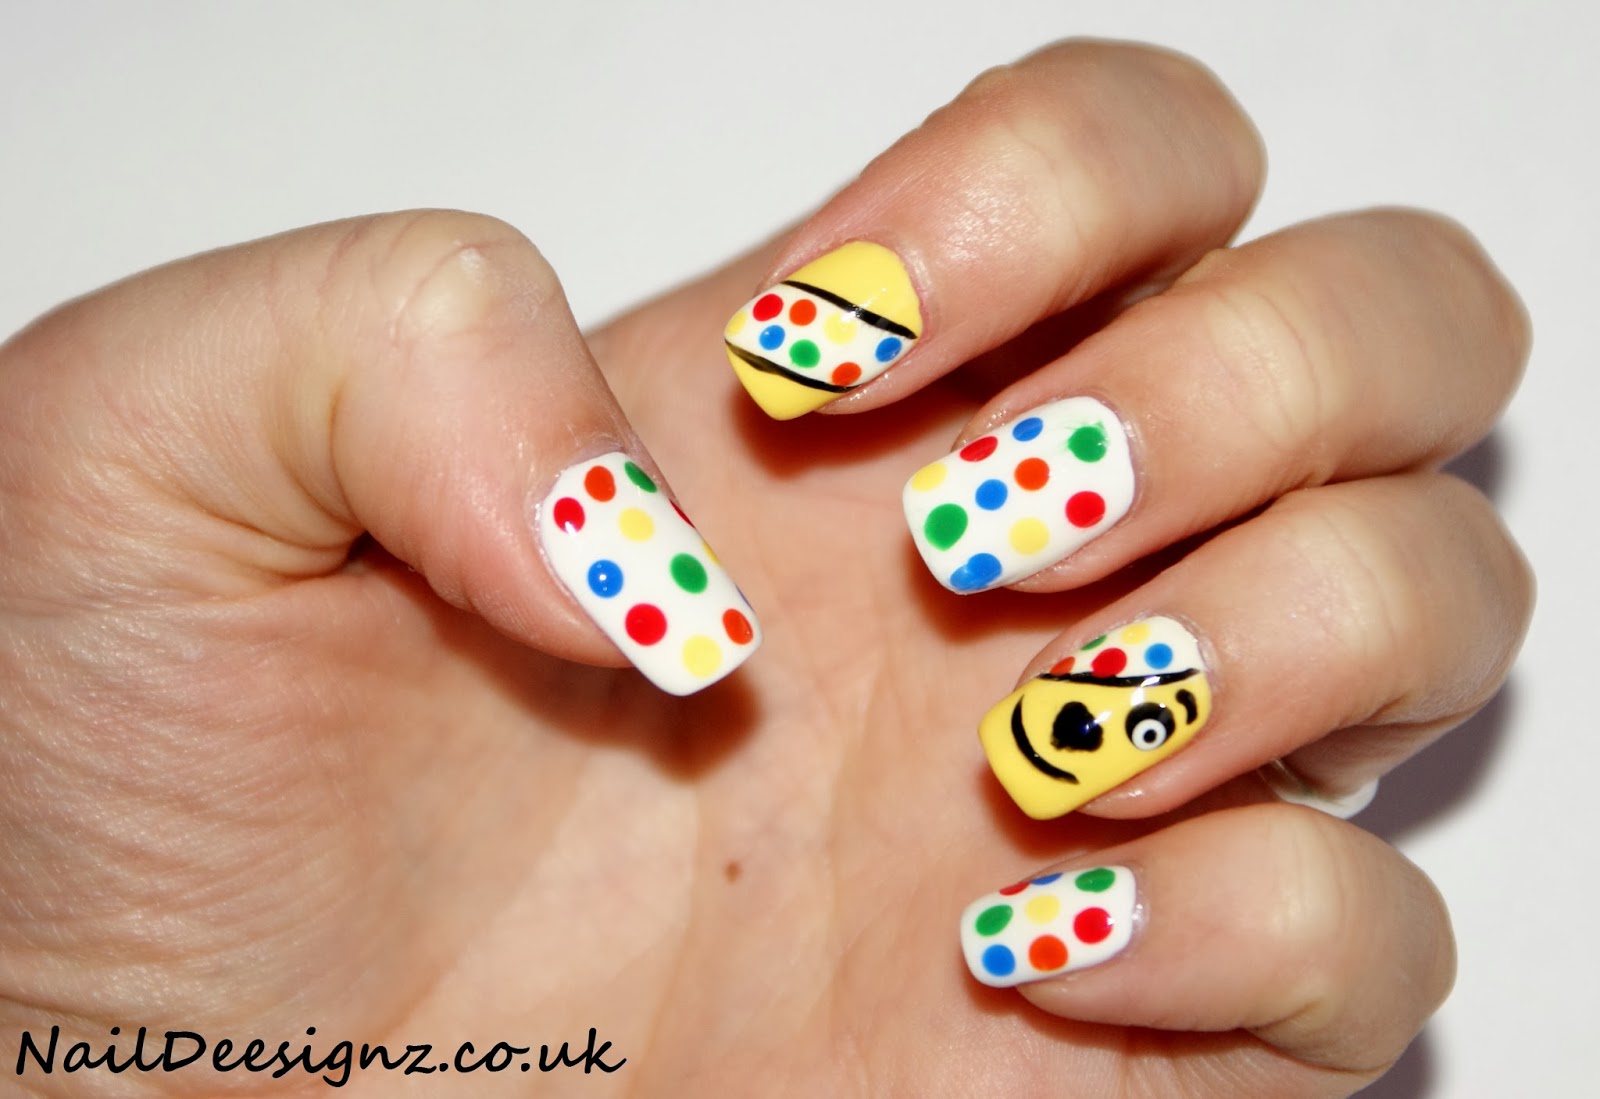 4. Cute and Colorful Nail Designs for Kids - wide 8